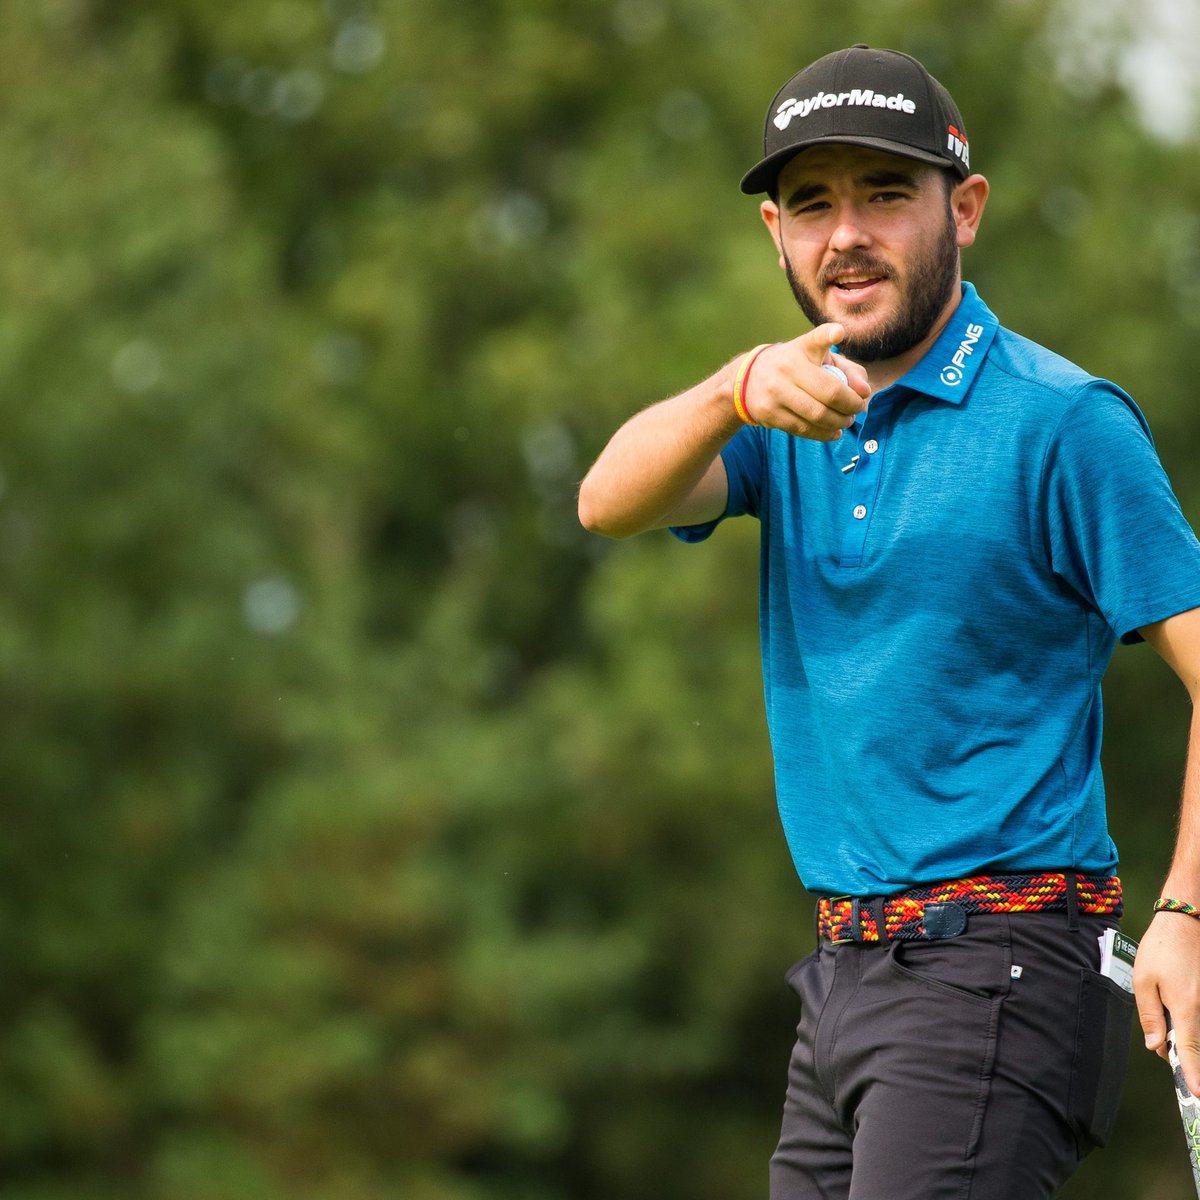 A birdie on the last hole secured the lead position for @Angel_Hidalgo7 @IlPelagone #ToscanaAlpsOpen. He carded a -6 (65) for the day which put him one shot ahead of @ManasseroMatteo at -14 after 2nd round. #italianprotour